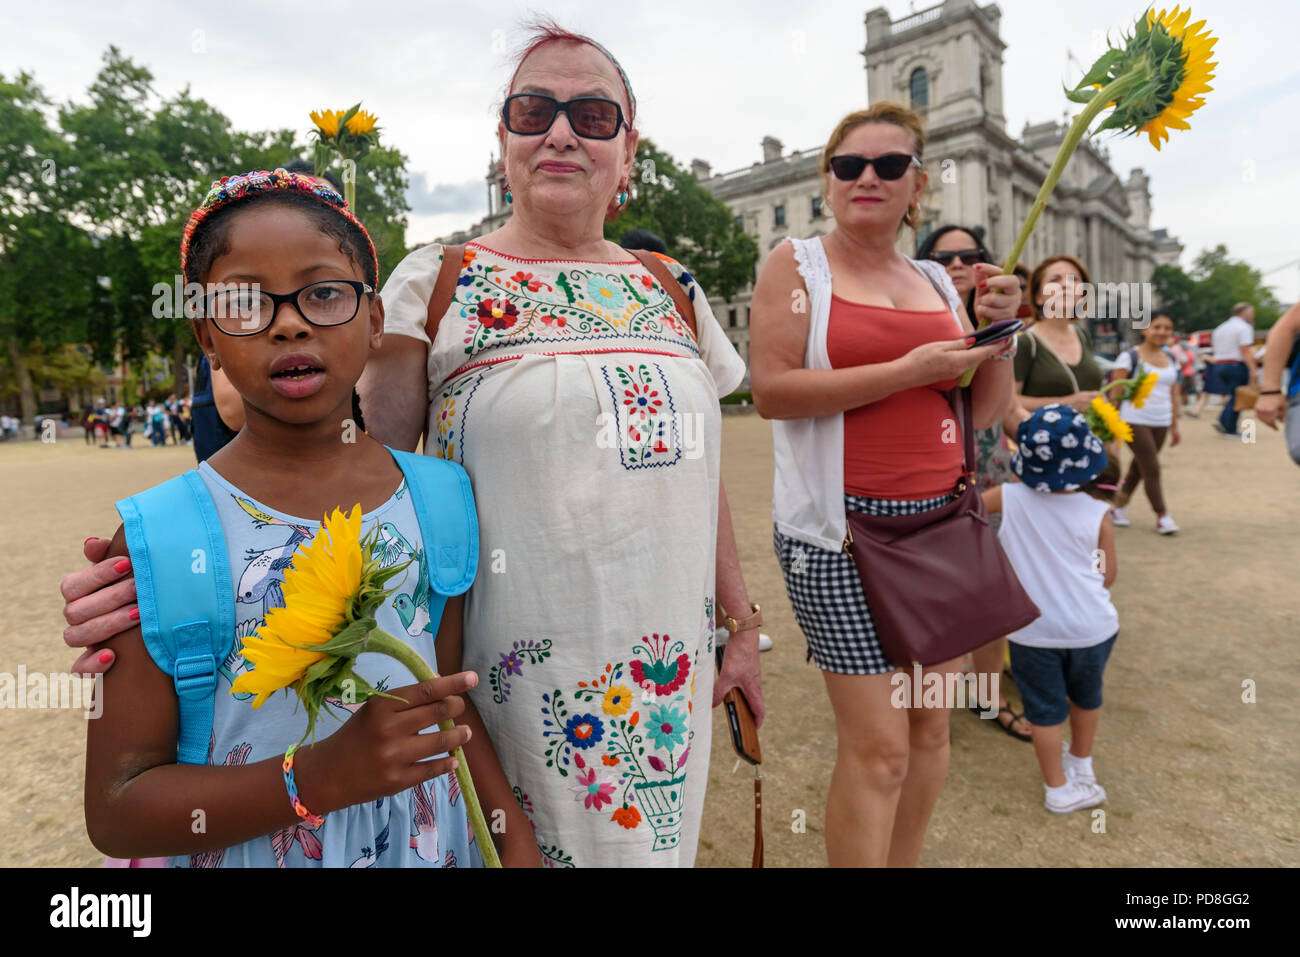 London, UK. 7th August 2018. Colombians hold sunflowers at a  protest in Parliament Square while the names of over a hundered muredred community leaders are read.  The protest in support of the peace process in Colombia demanded an end to the daily threats and murders throughout the country. The International Mobilization for Life and Peace called on the new President of Colombia to put into action an urgent plan to protect social leaders and rapidly implement the peace agreement. Similar actions took place today at the UN in New York, the International Court of Justice in The Hague, and in Wa Stock Photo